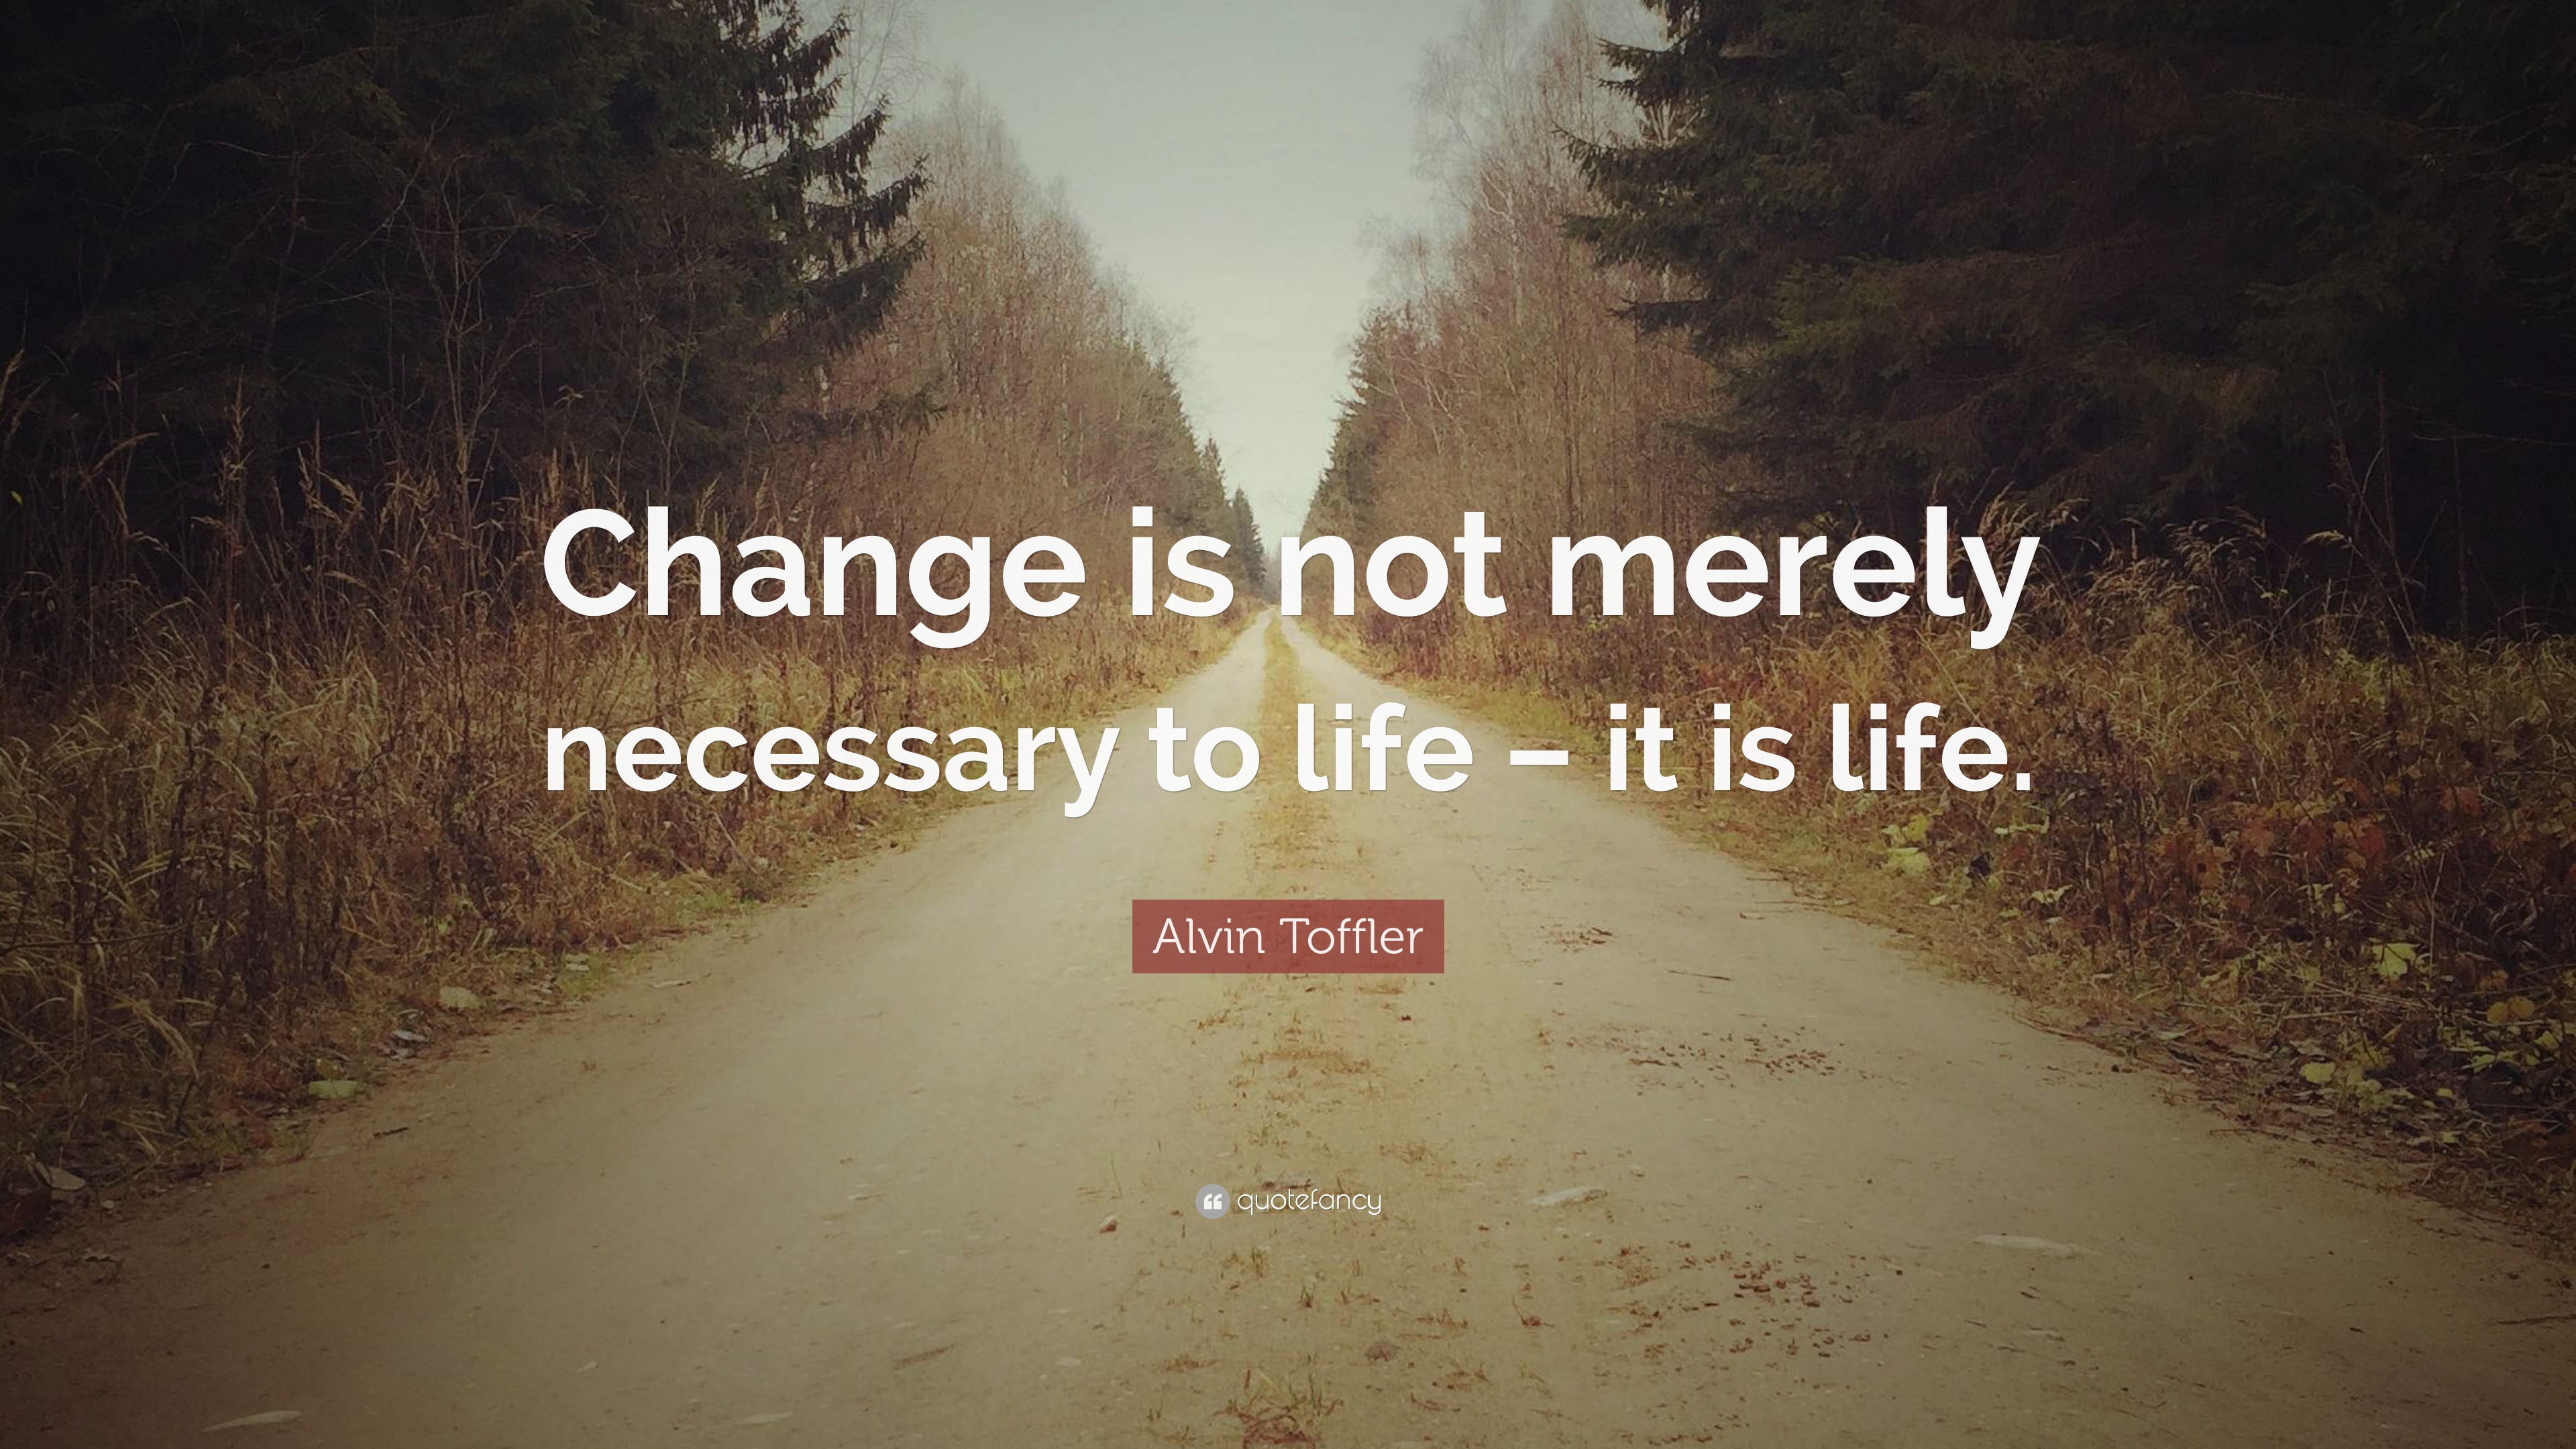 Alvin Toffler Quote: “Change is not merely necessary to life – it is life.”